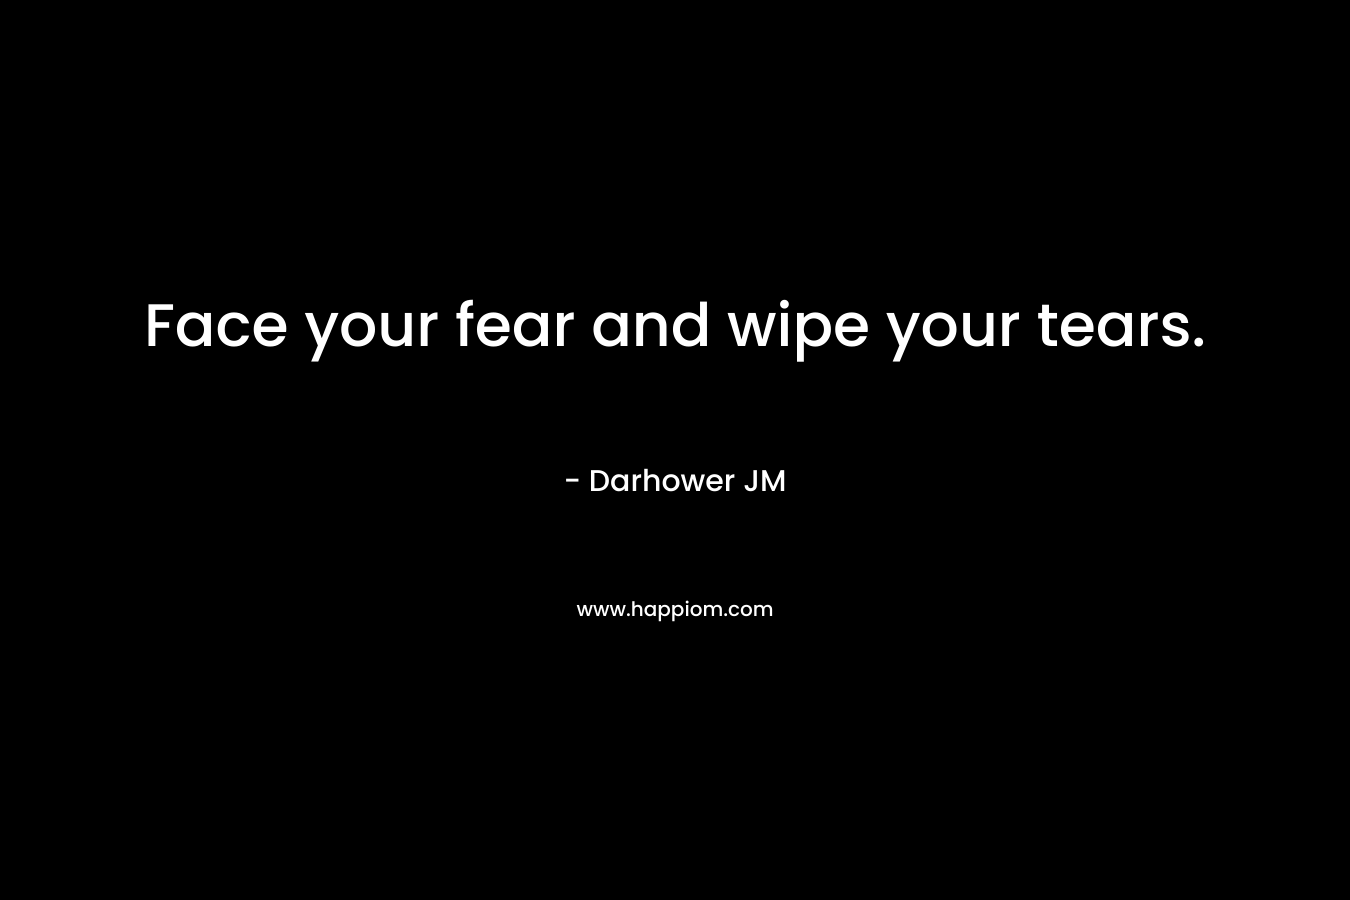 Face your fear and wipe your tears.